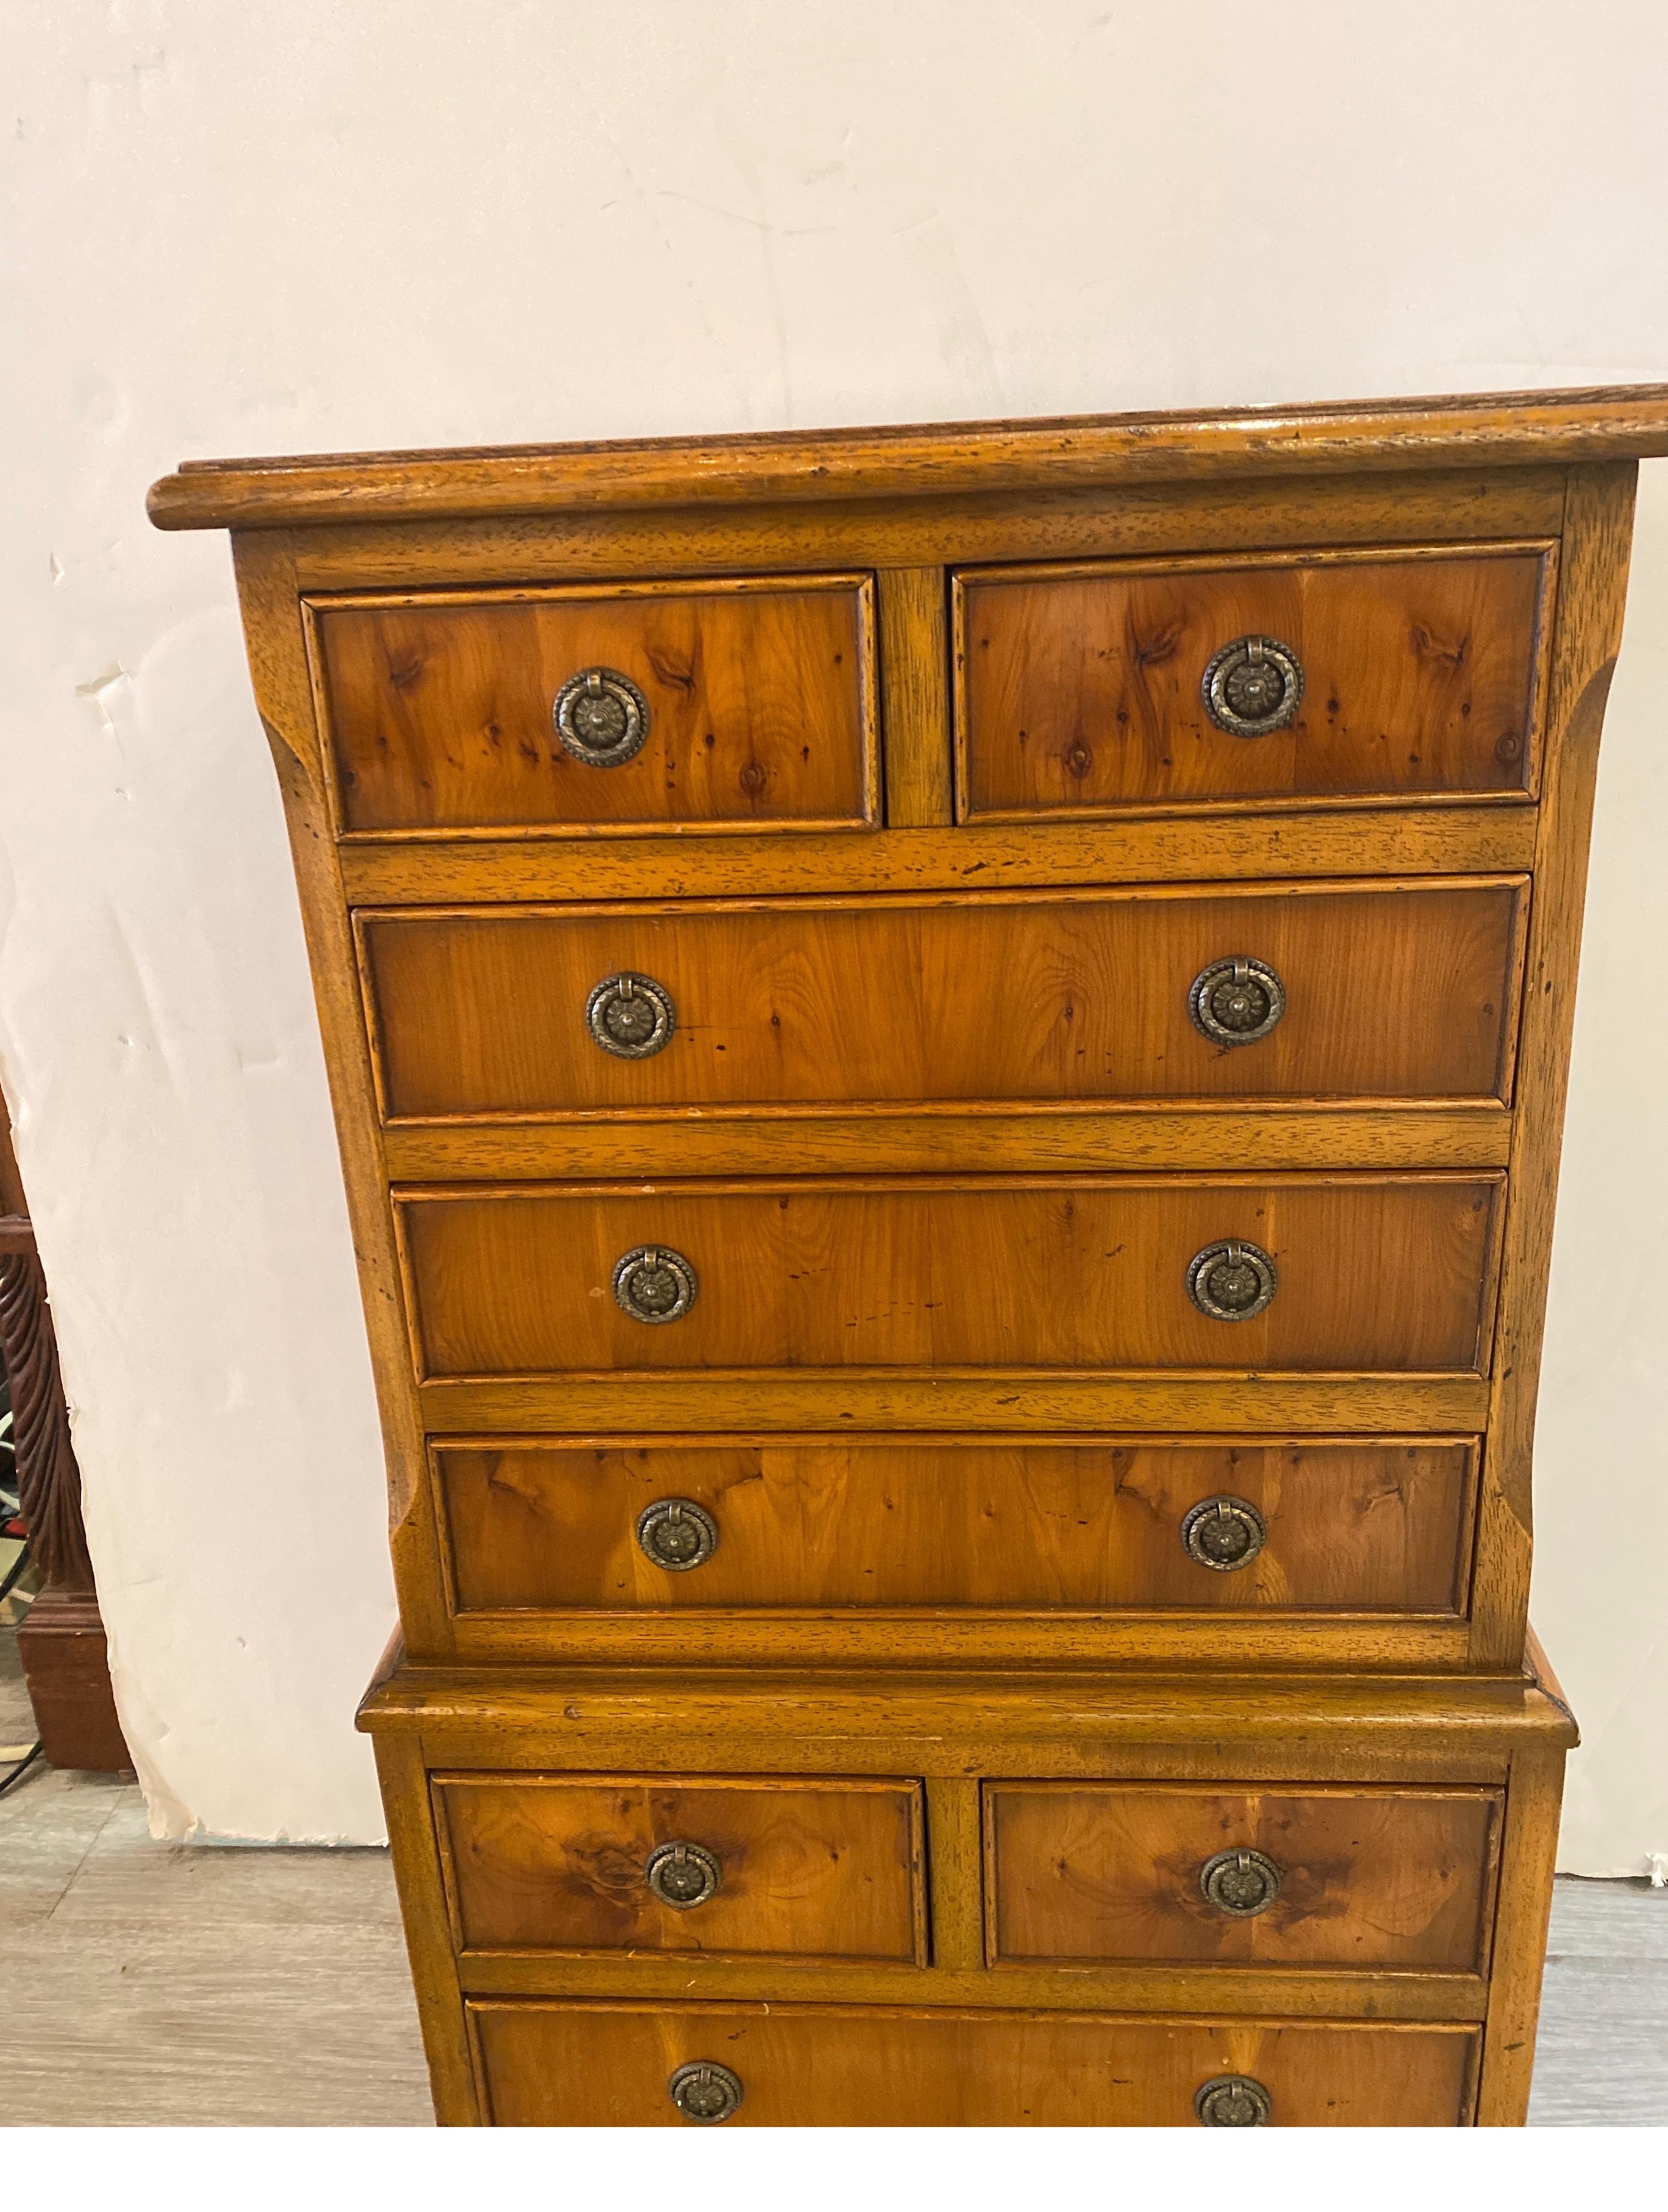 This English made chair side chest is 31 inches tall, made in London of yew wood. This very functional side chest with working drawers is perfect as a night stand, or by on chair with a lamp. Marked inside the upper drawer 